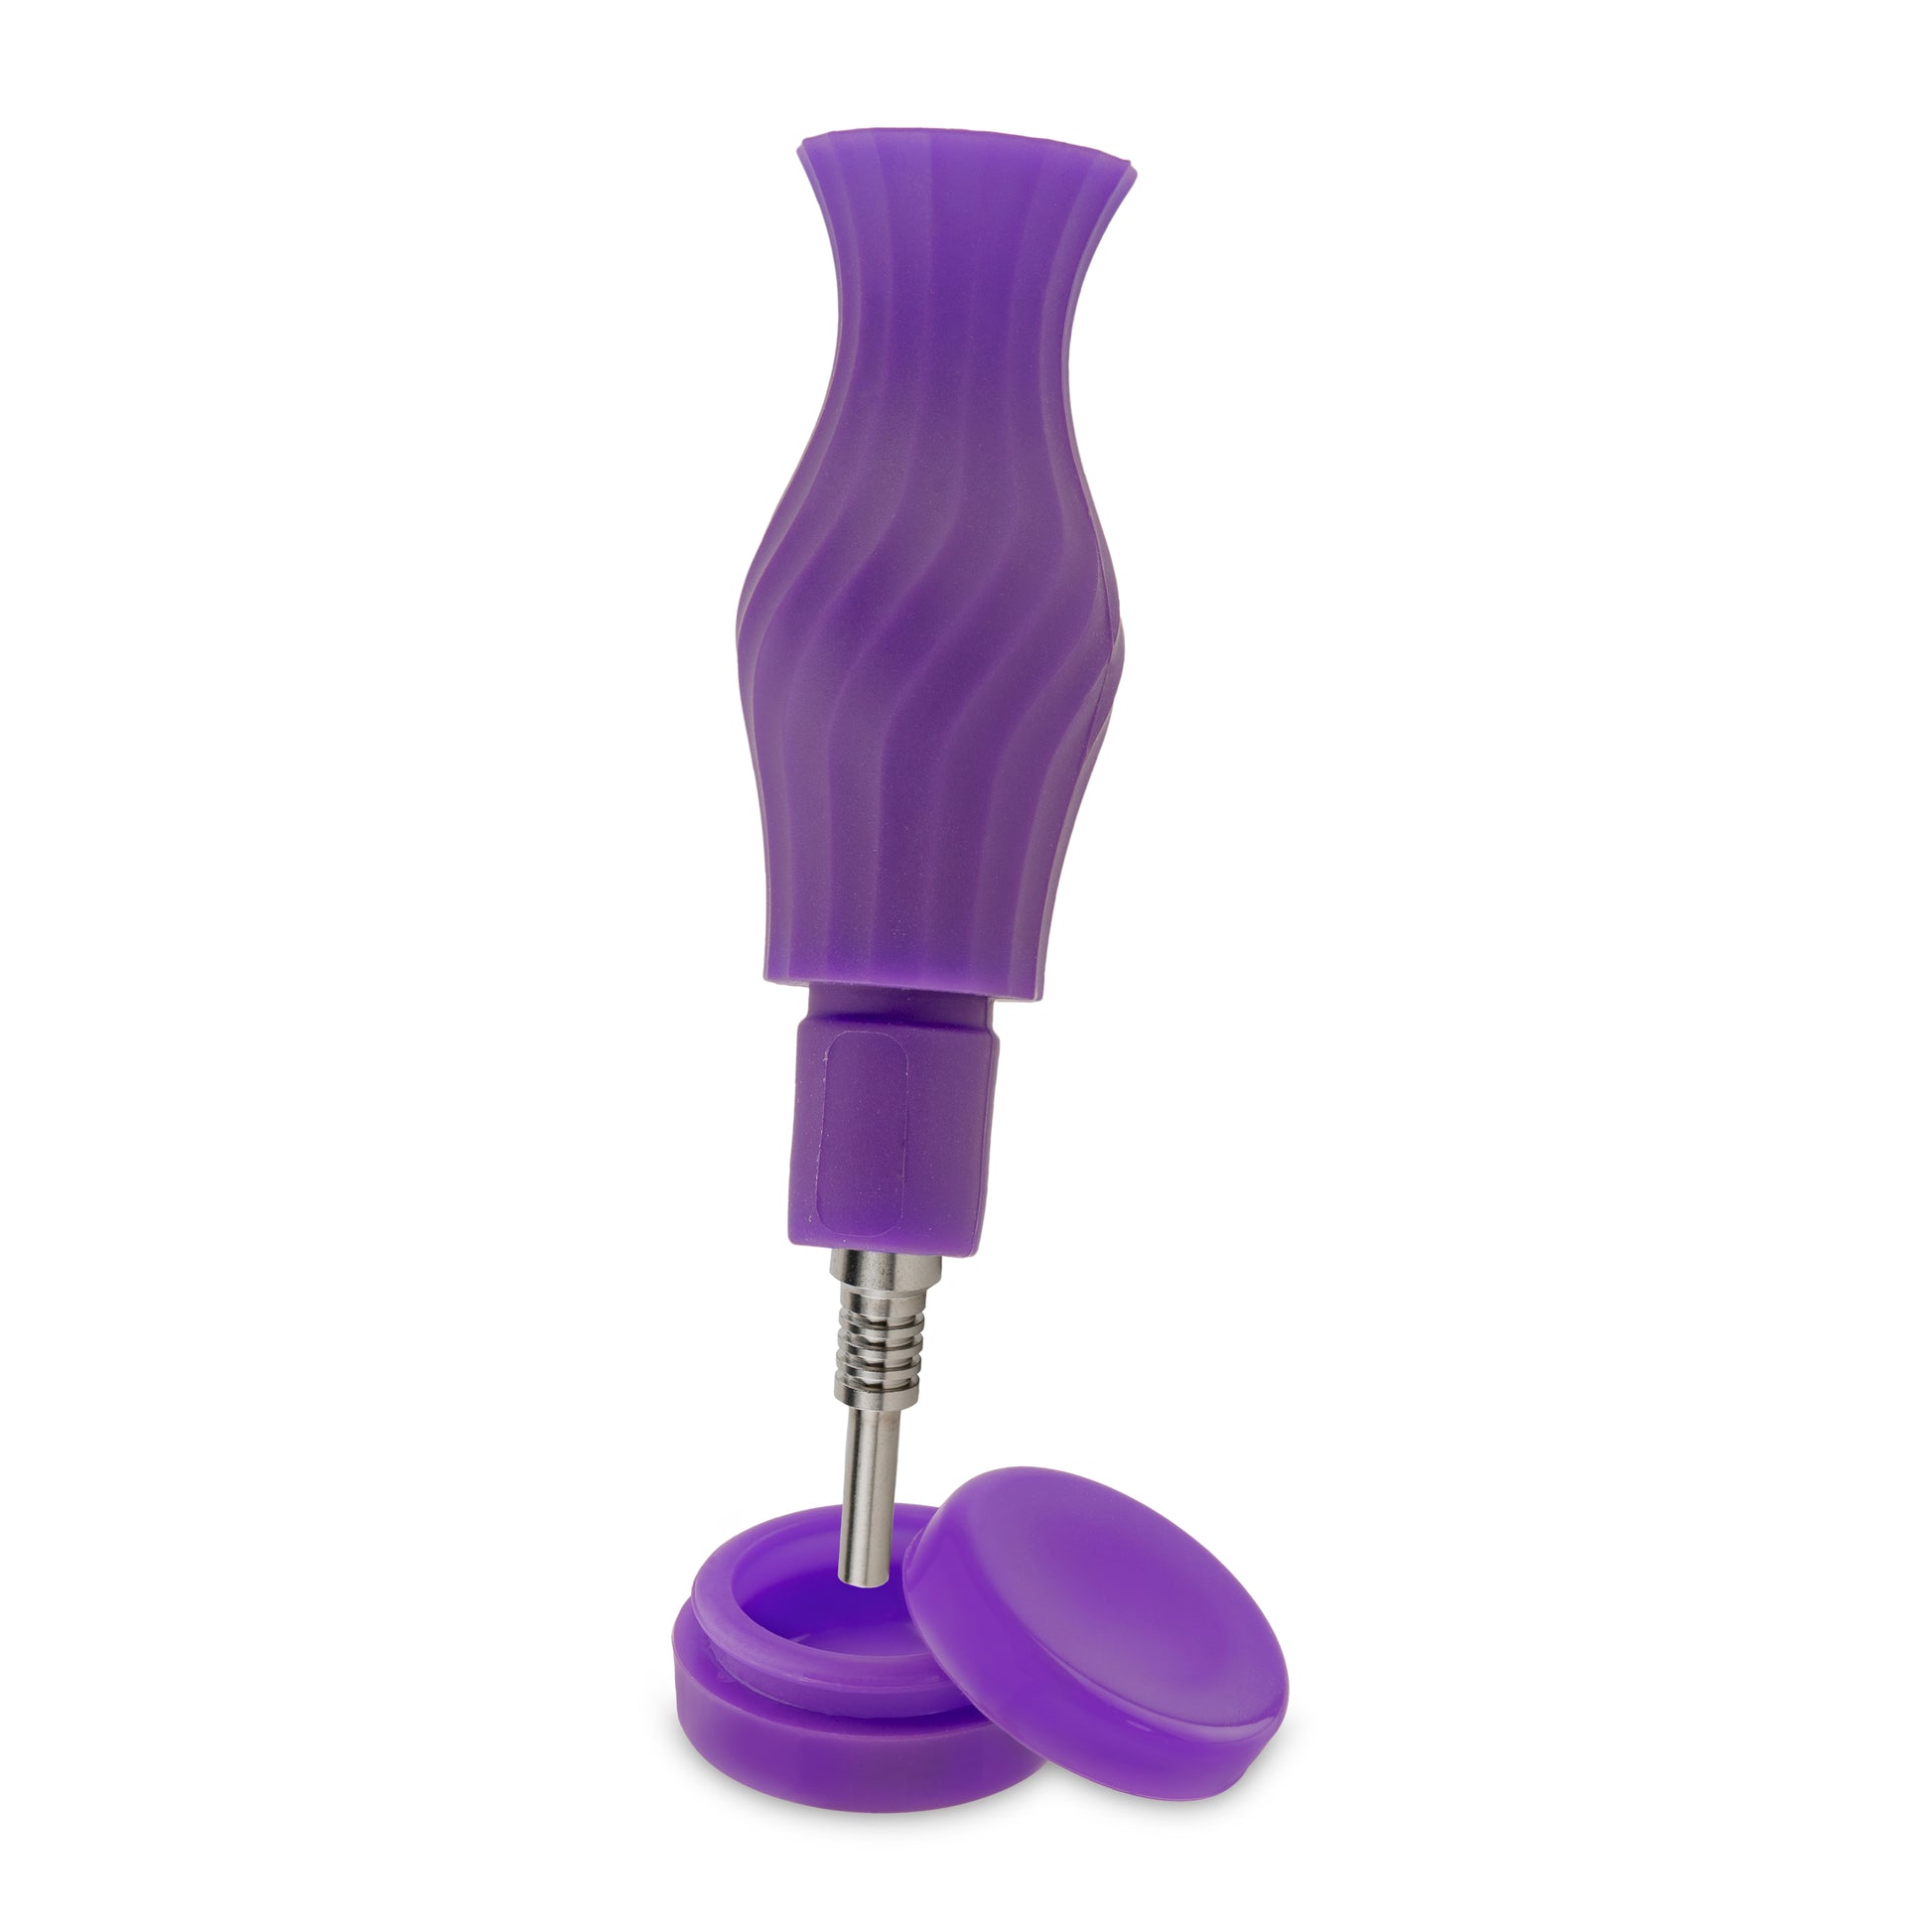 Ooze Bectar – Silicone Bubbler & Dab Straw – Ultra Purple